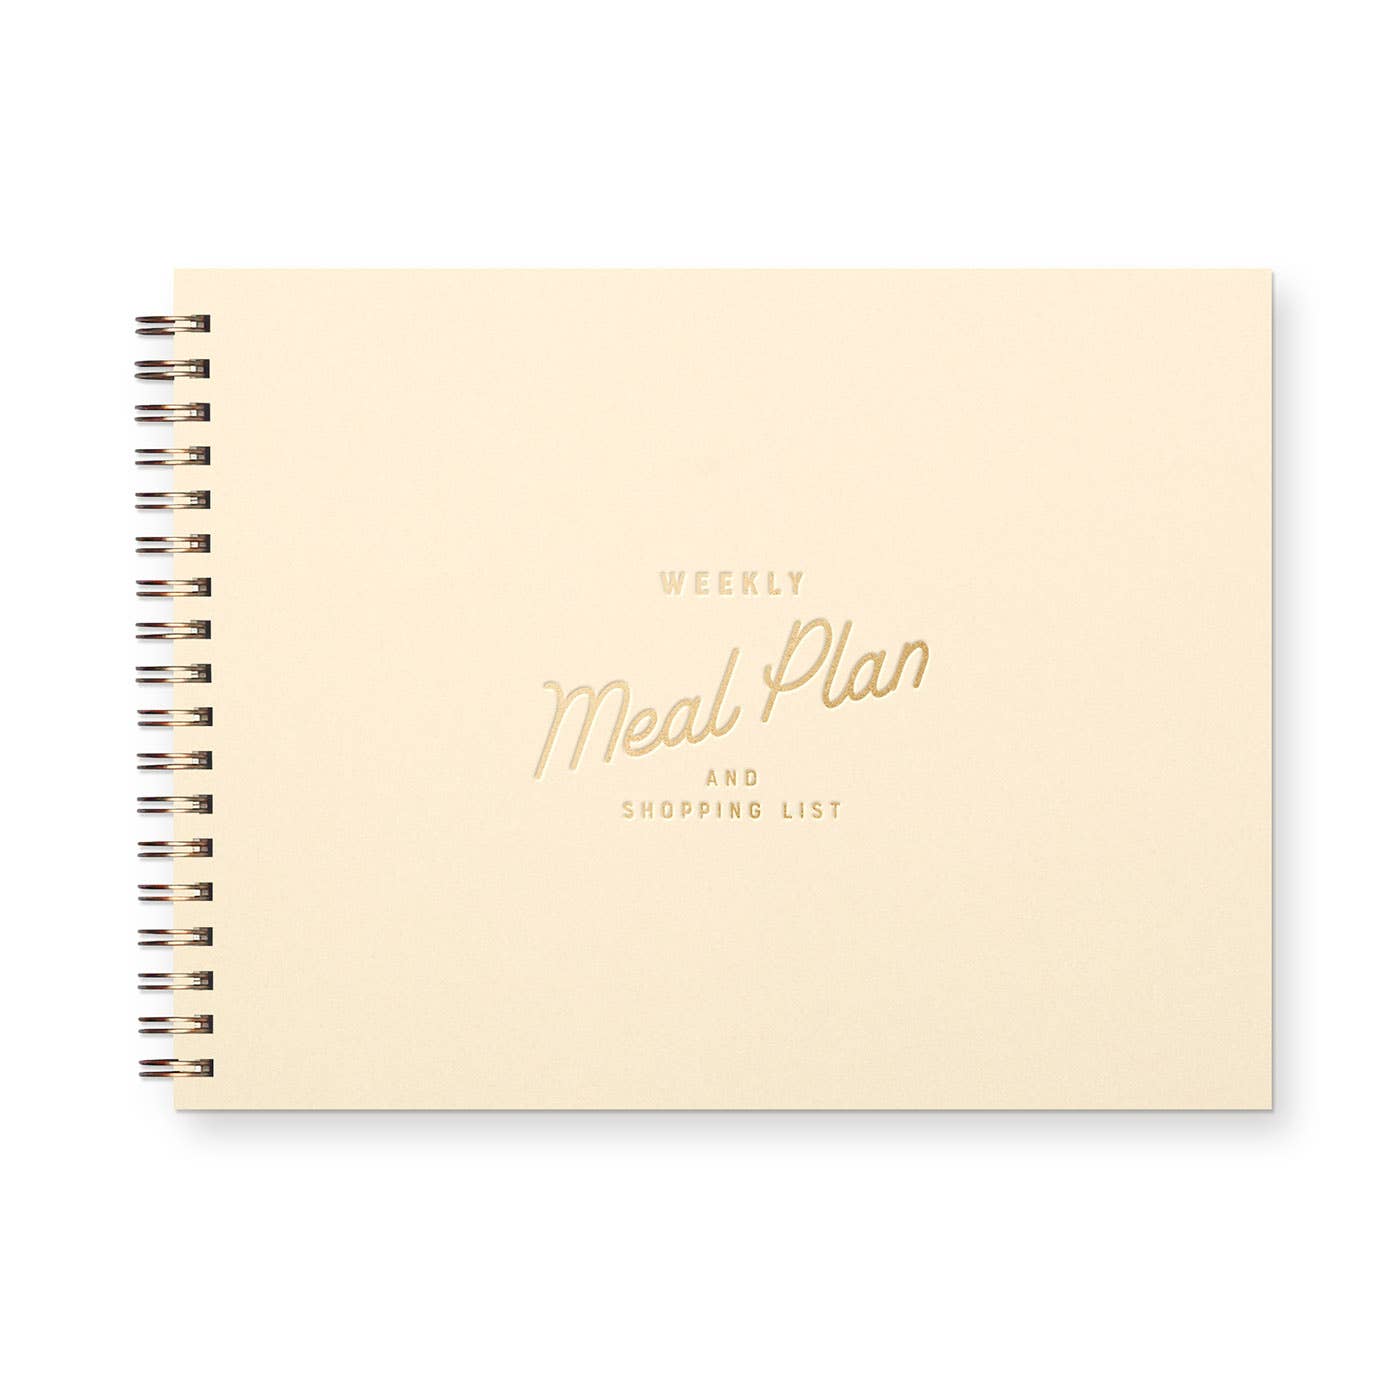 Ruff House Print Shop - Retro Weekly Meal Planner: Seashell Cover | Canyon Ink